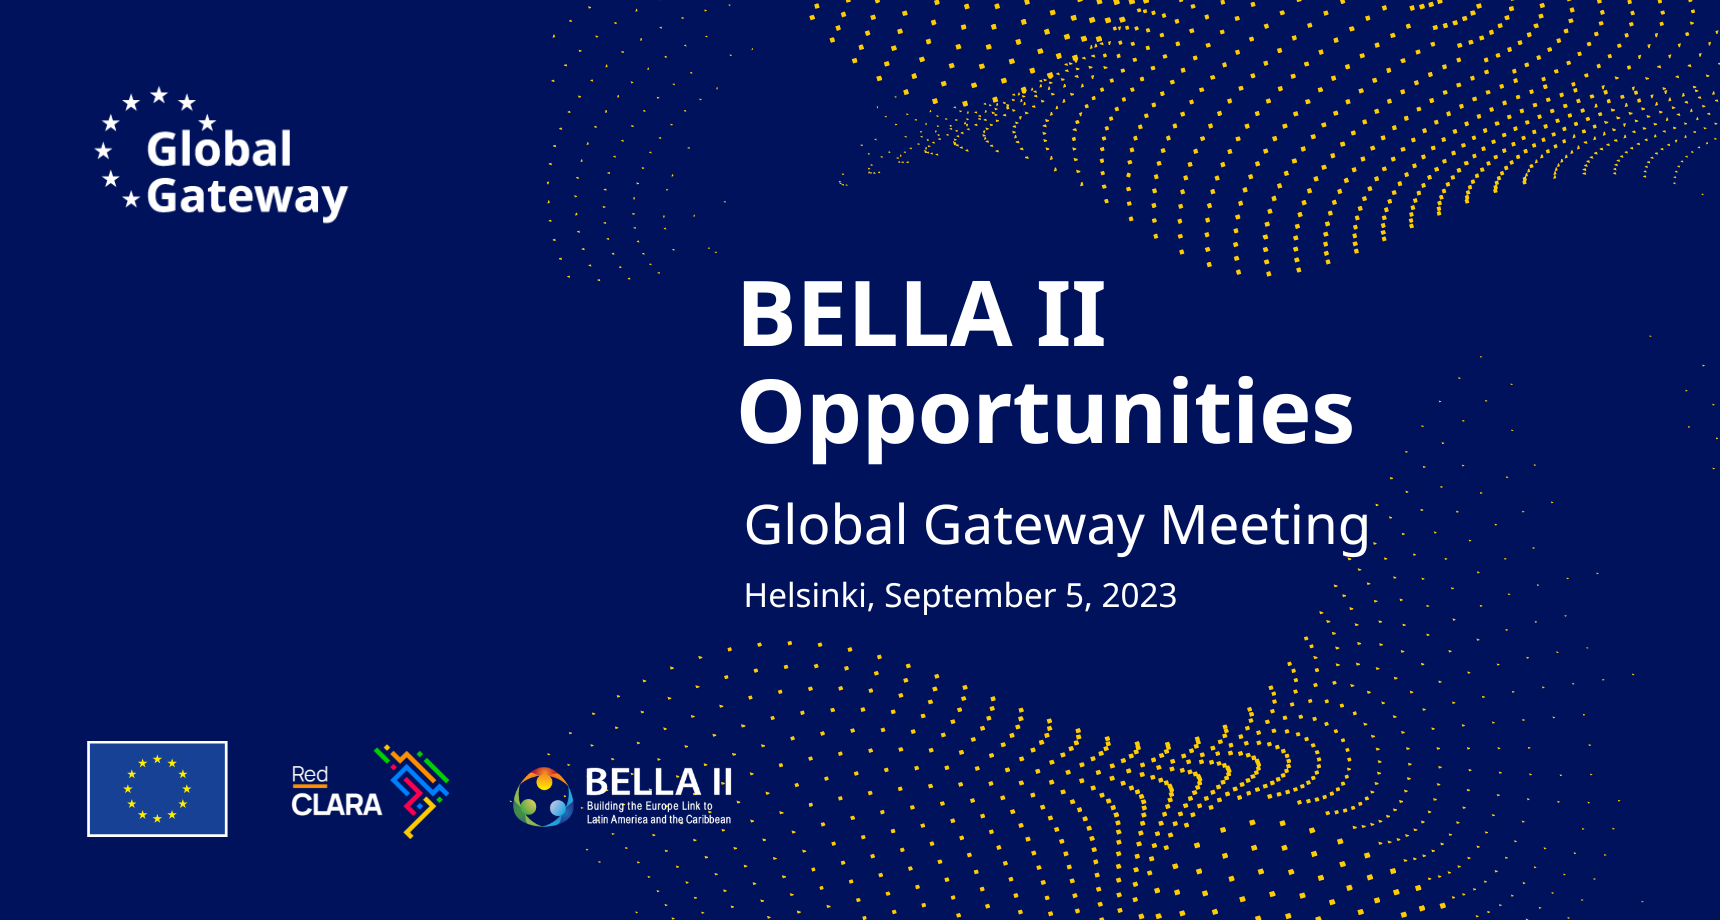  RedCLARA and BELLA II presented a portfolio of connectivity projects in Global Gateway meeting in Finland.